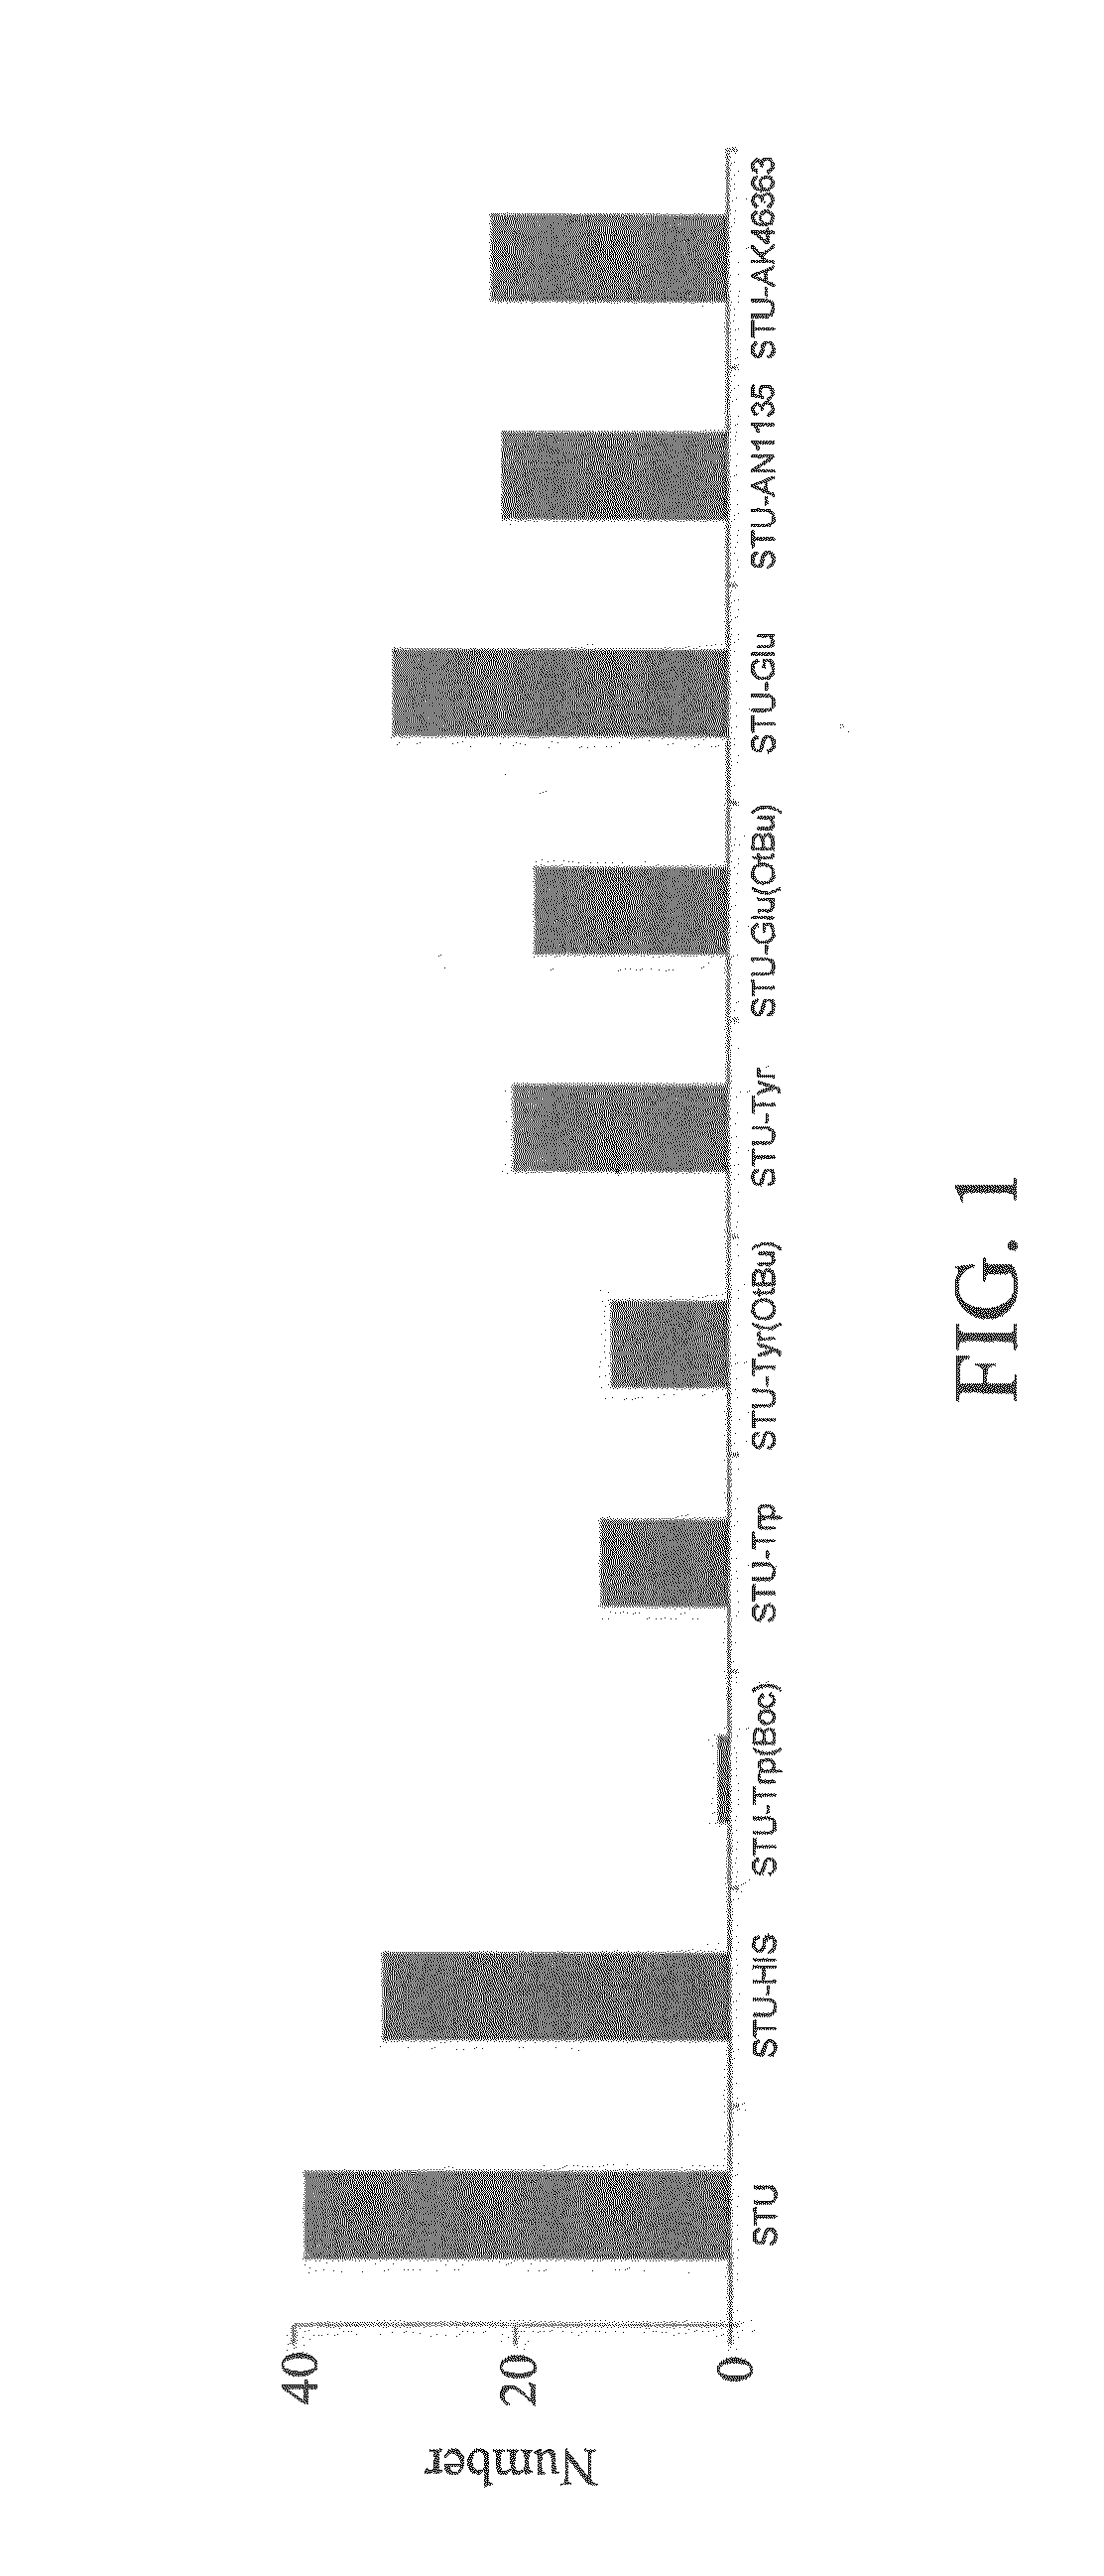 Selective inhibitors for protein kinases and pharmaceutical composition and use thereof